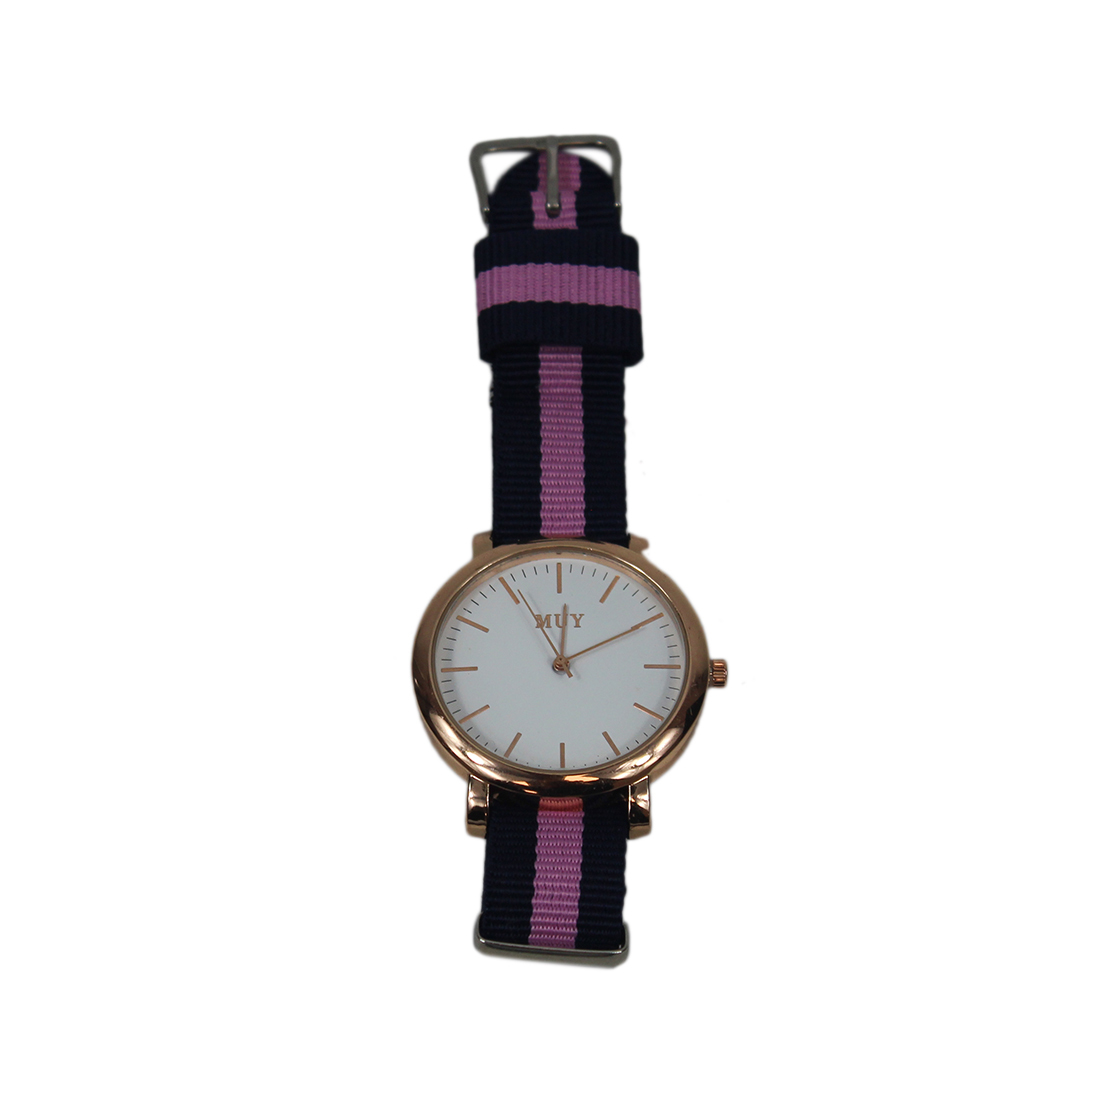 Colour Strap with gold face